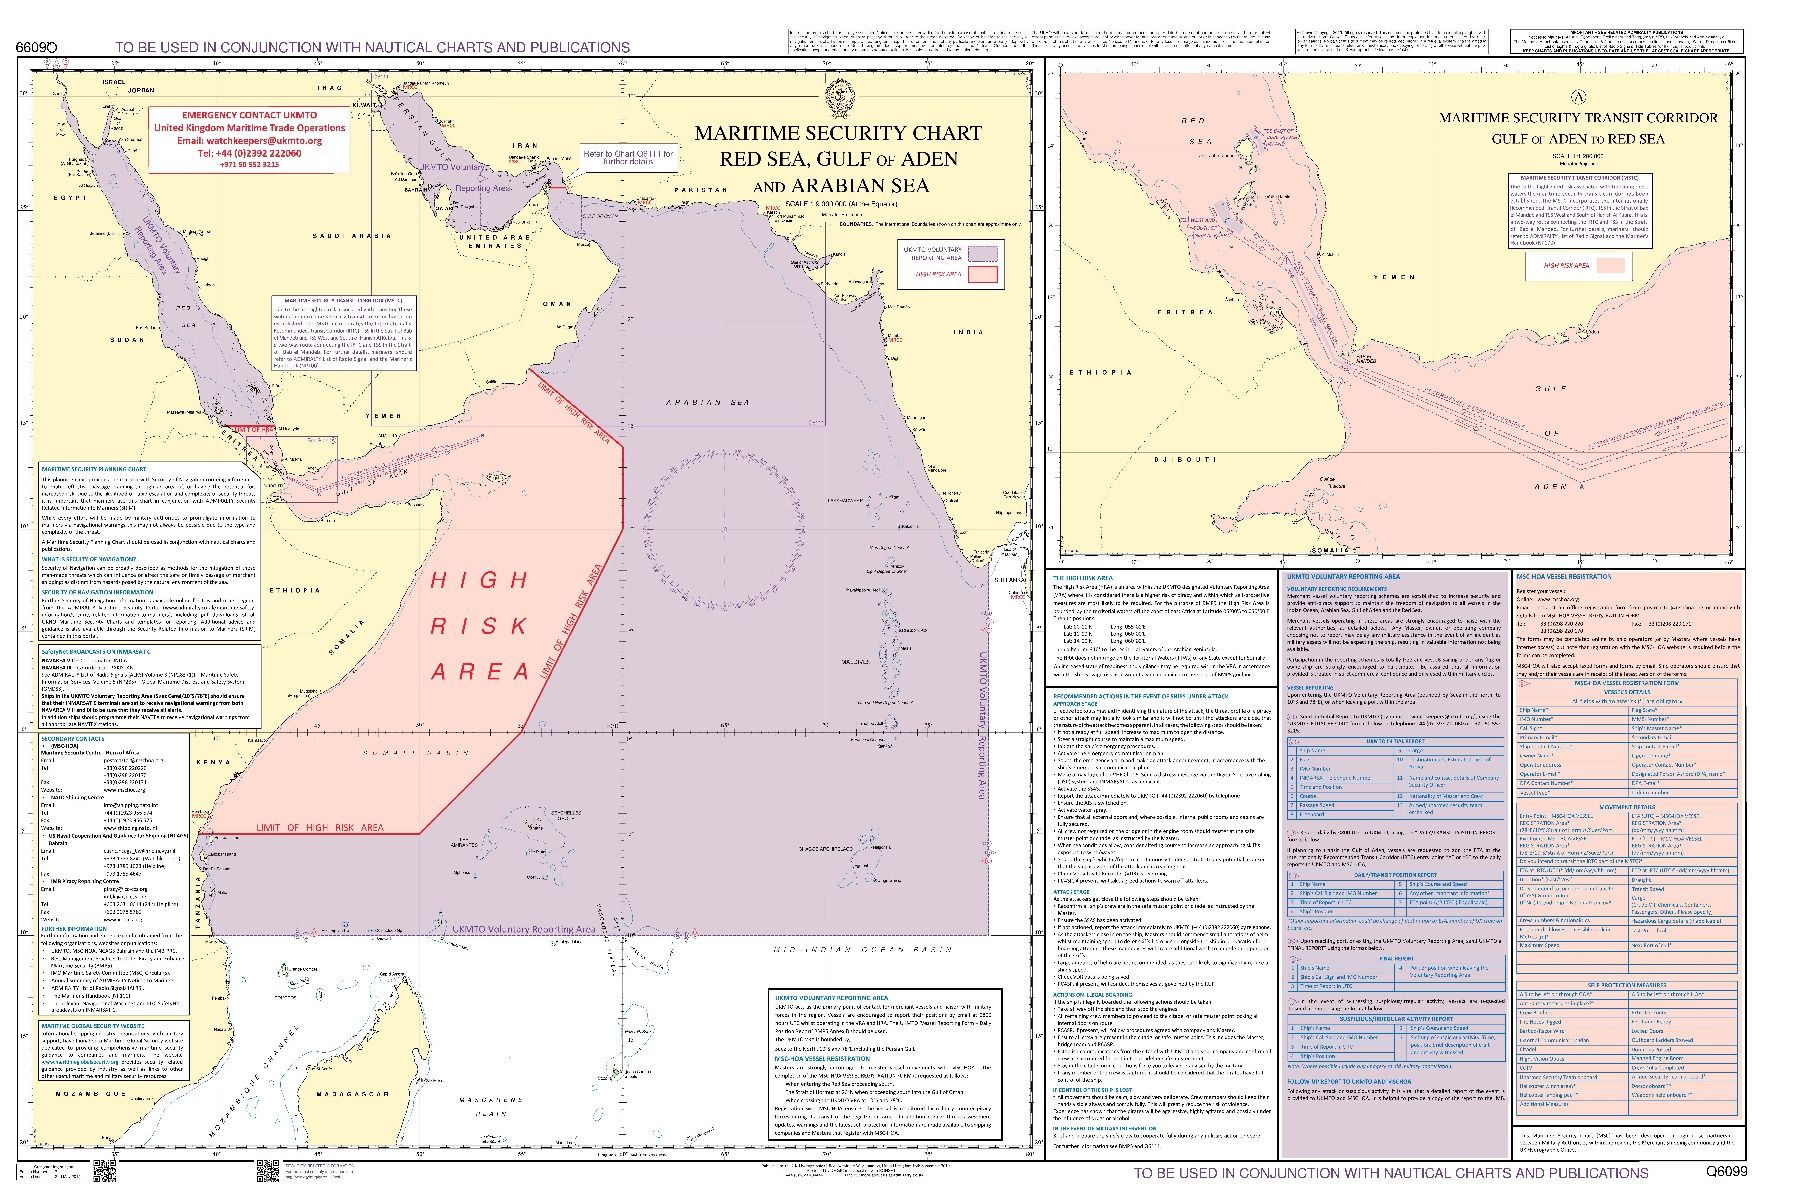 Maritime Security Planning Chart: Red Sea, Gulf of Aden and Arabian Sea?